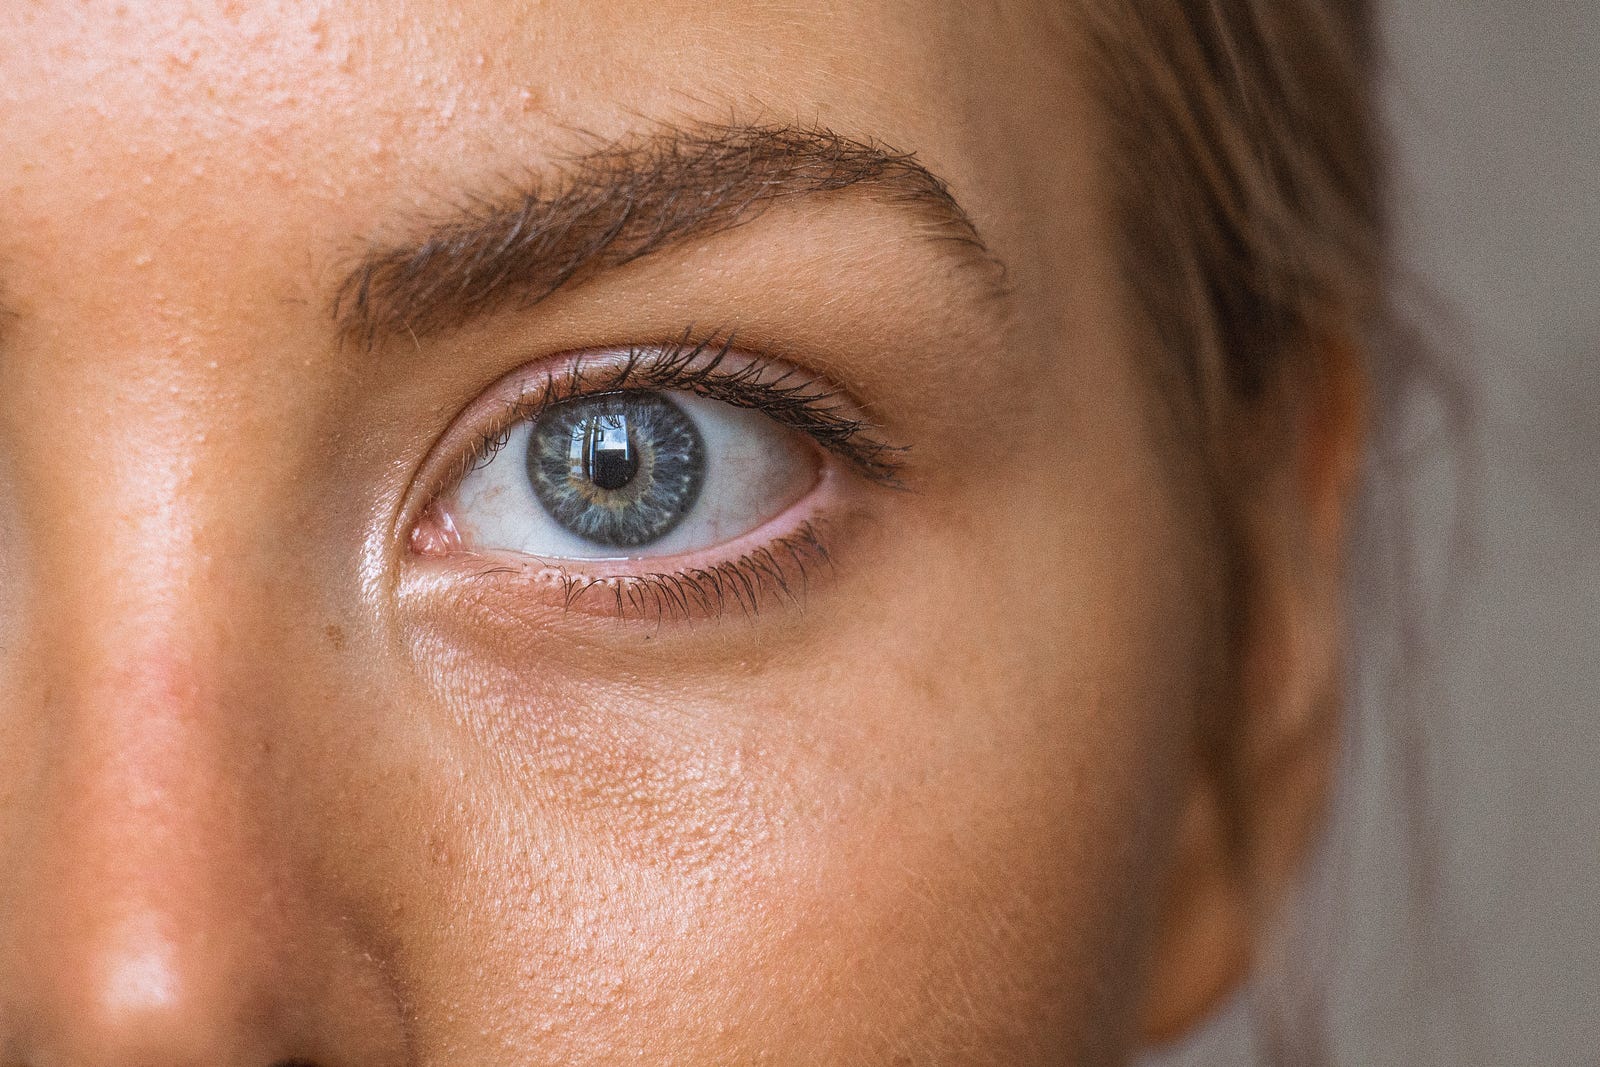 A white woman, with blue eyes, gazes at us with her left yey. We see only the upper left part of her face. The positive effects of traditional Botox injections are temporary, typically lasting for a few months before requiring repeat treatments.